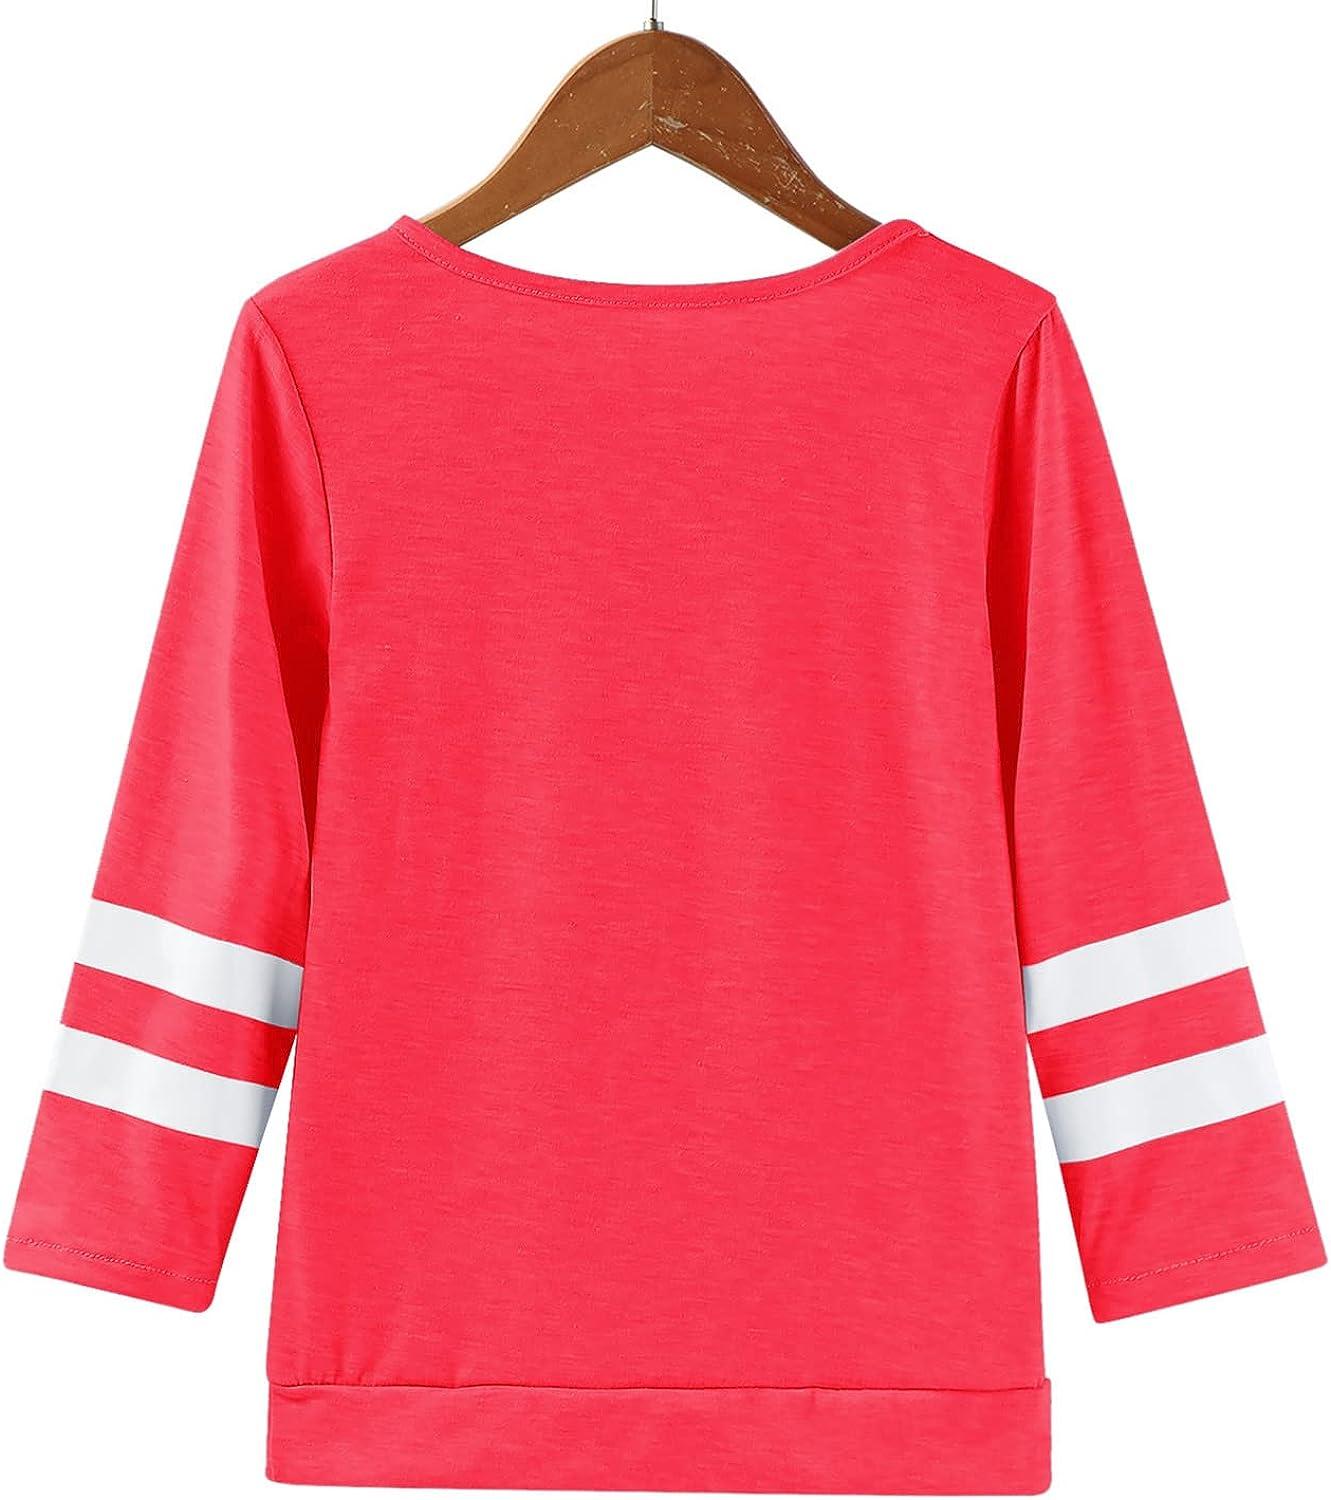 Tunic T-Shirt Casual Kids Loose Casual Sweatshirt Long Sleeve Crewneck  Pullover Tops Girls Blouse Girls Tops Girl Shirts 4t Red 4-5T